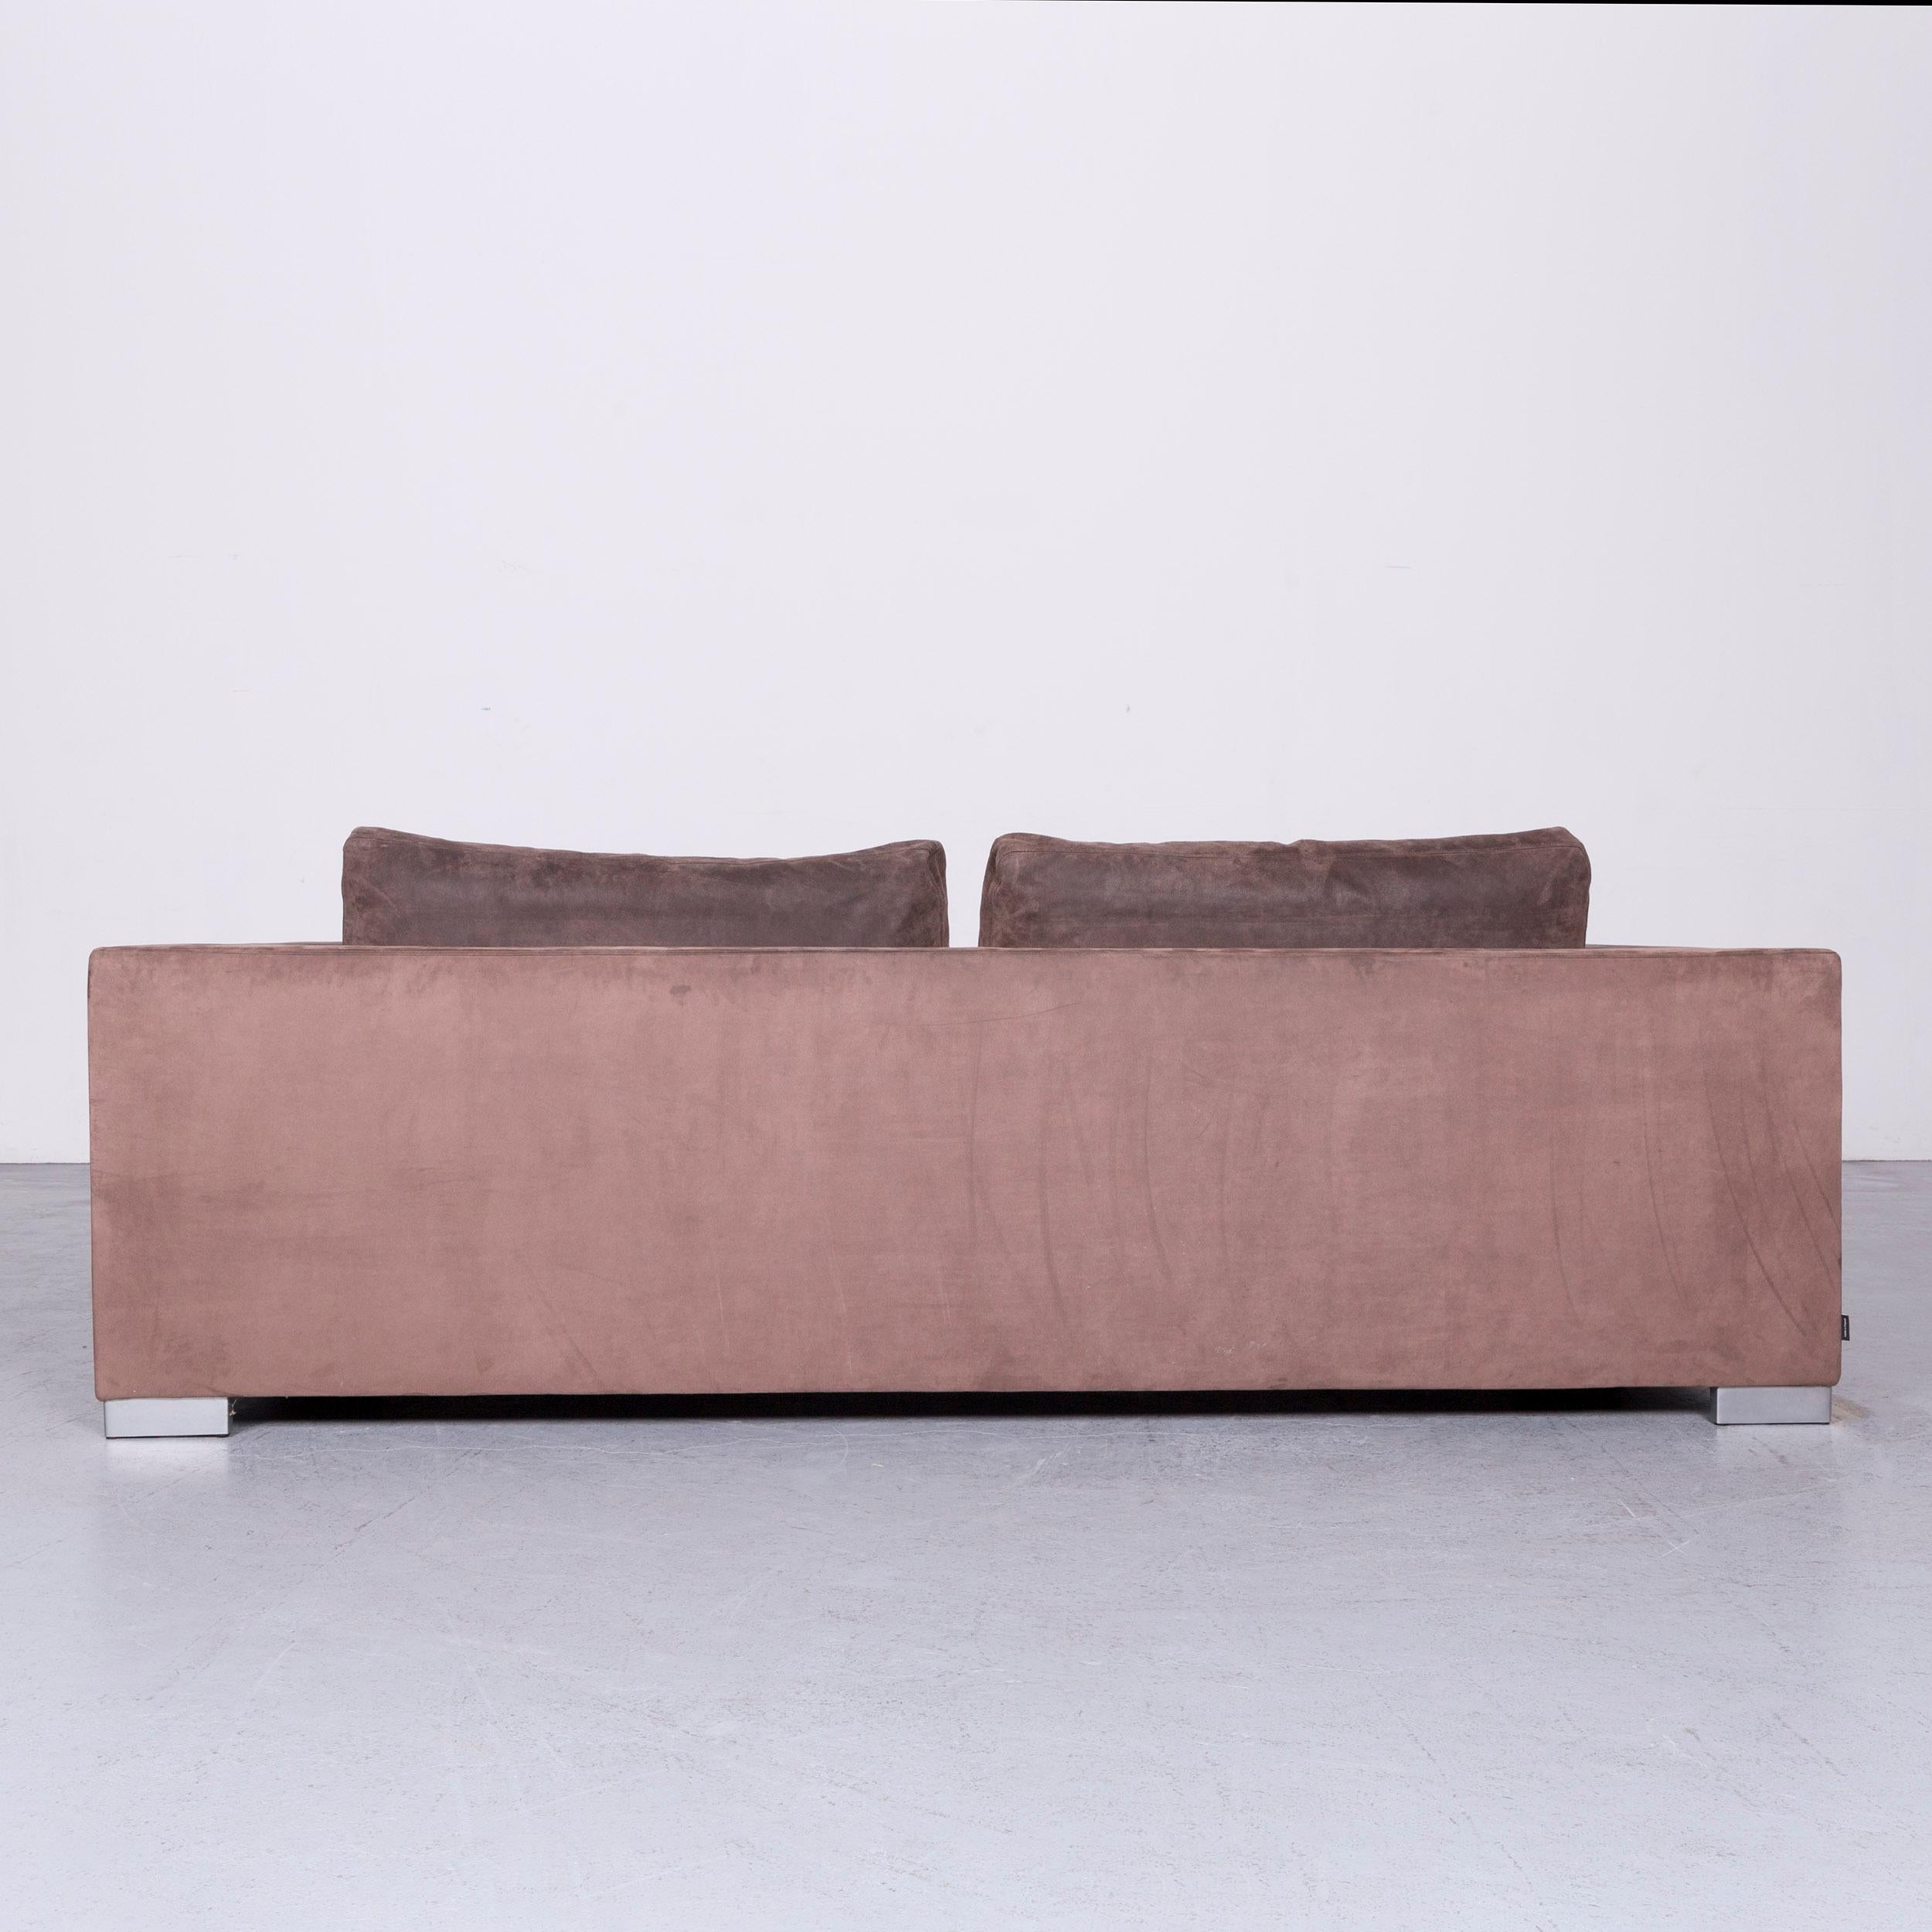 Ligne Roset Rive Gauche Designer Fabric Sofa Footstool Set Brown Two-Seat Couch 5